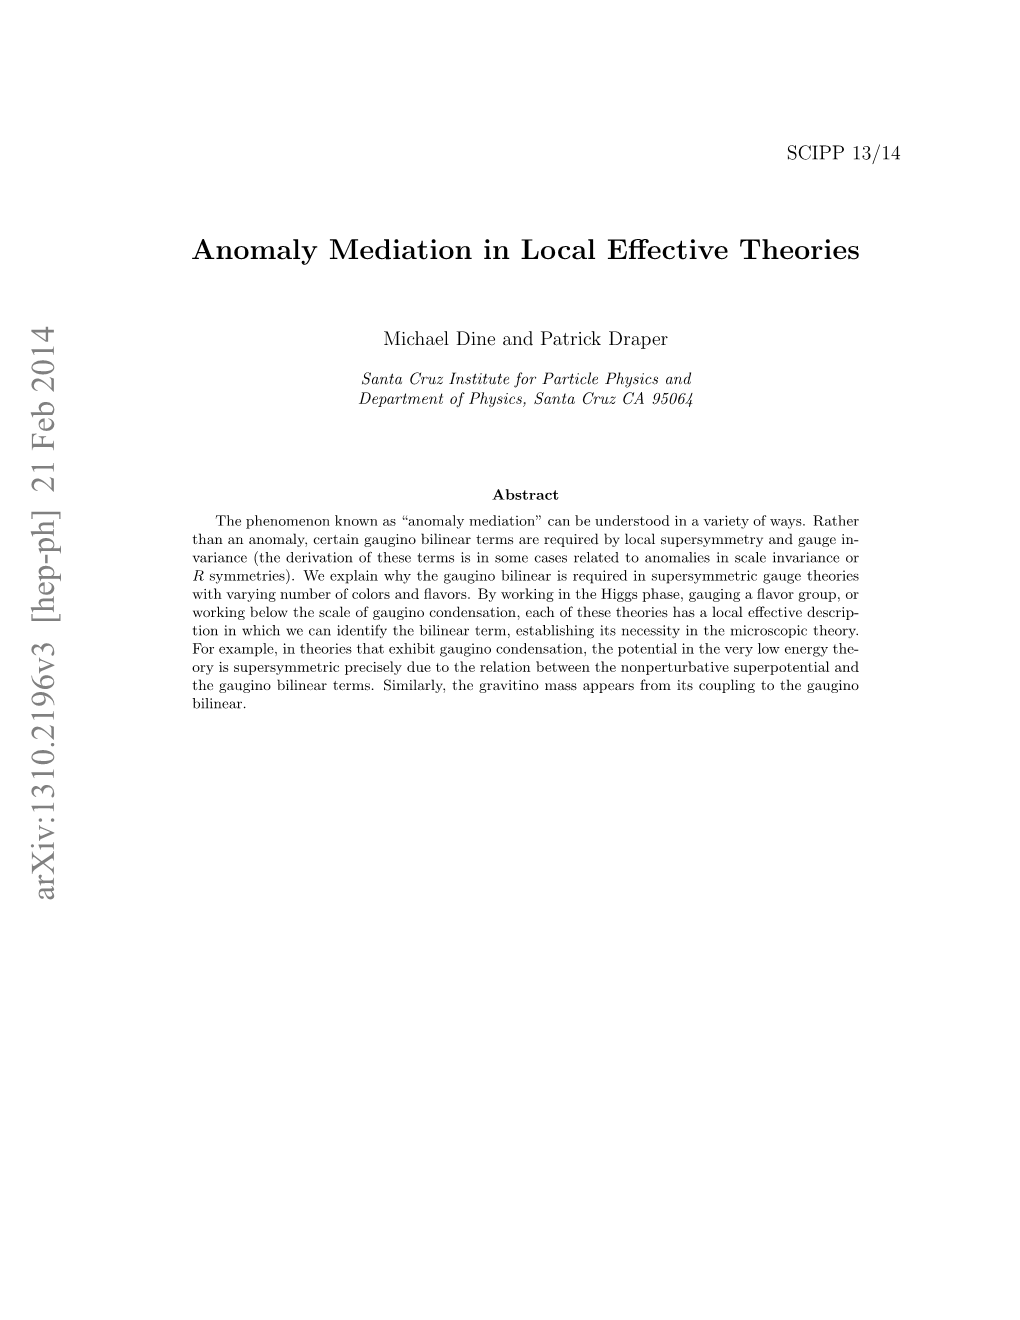 Anomaly Mediation in Local Effective Theories